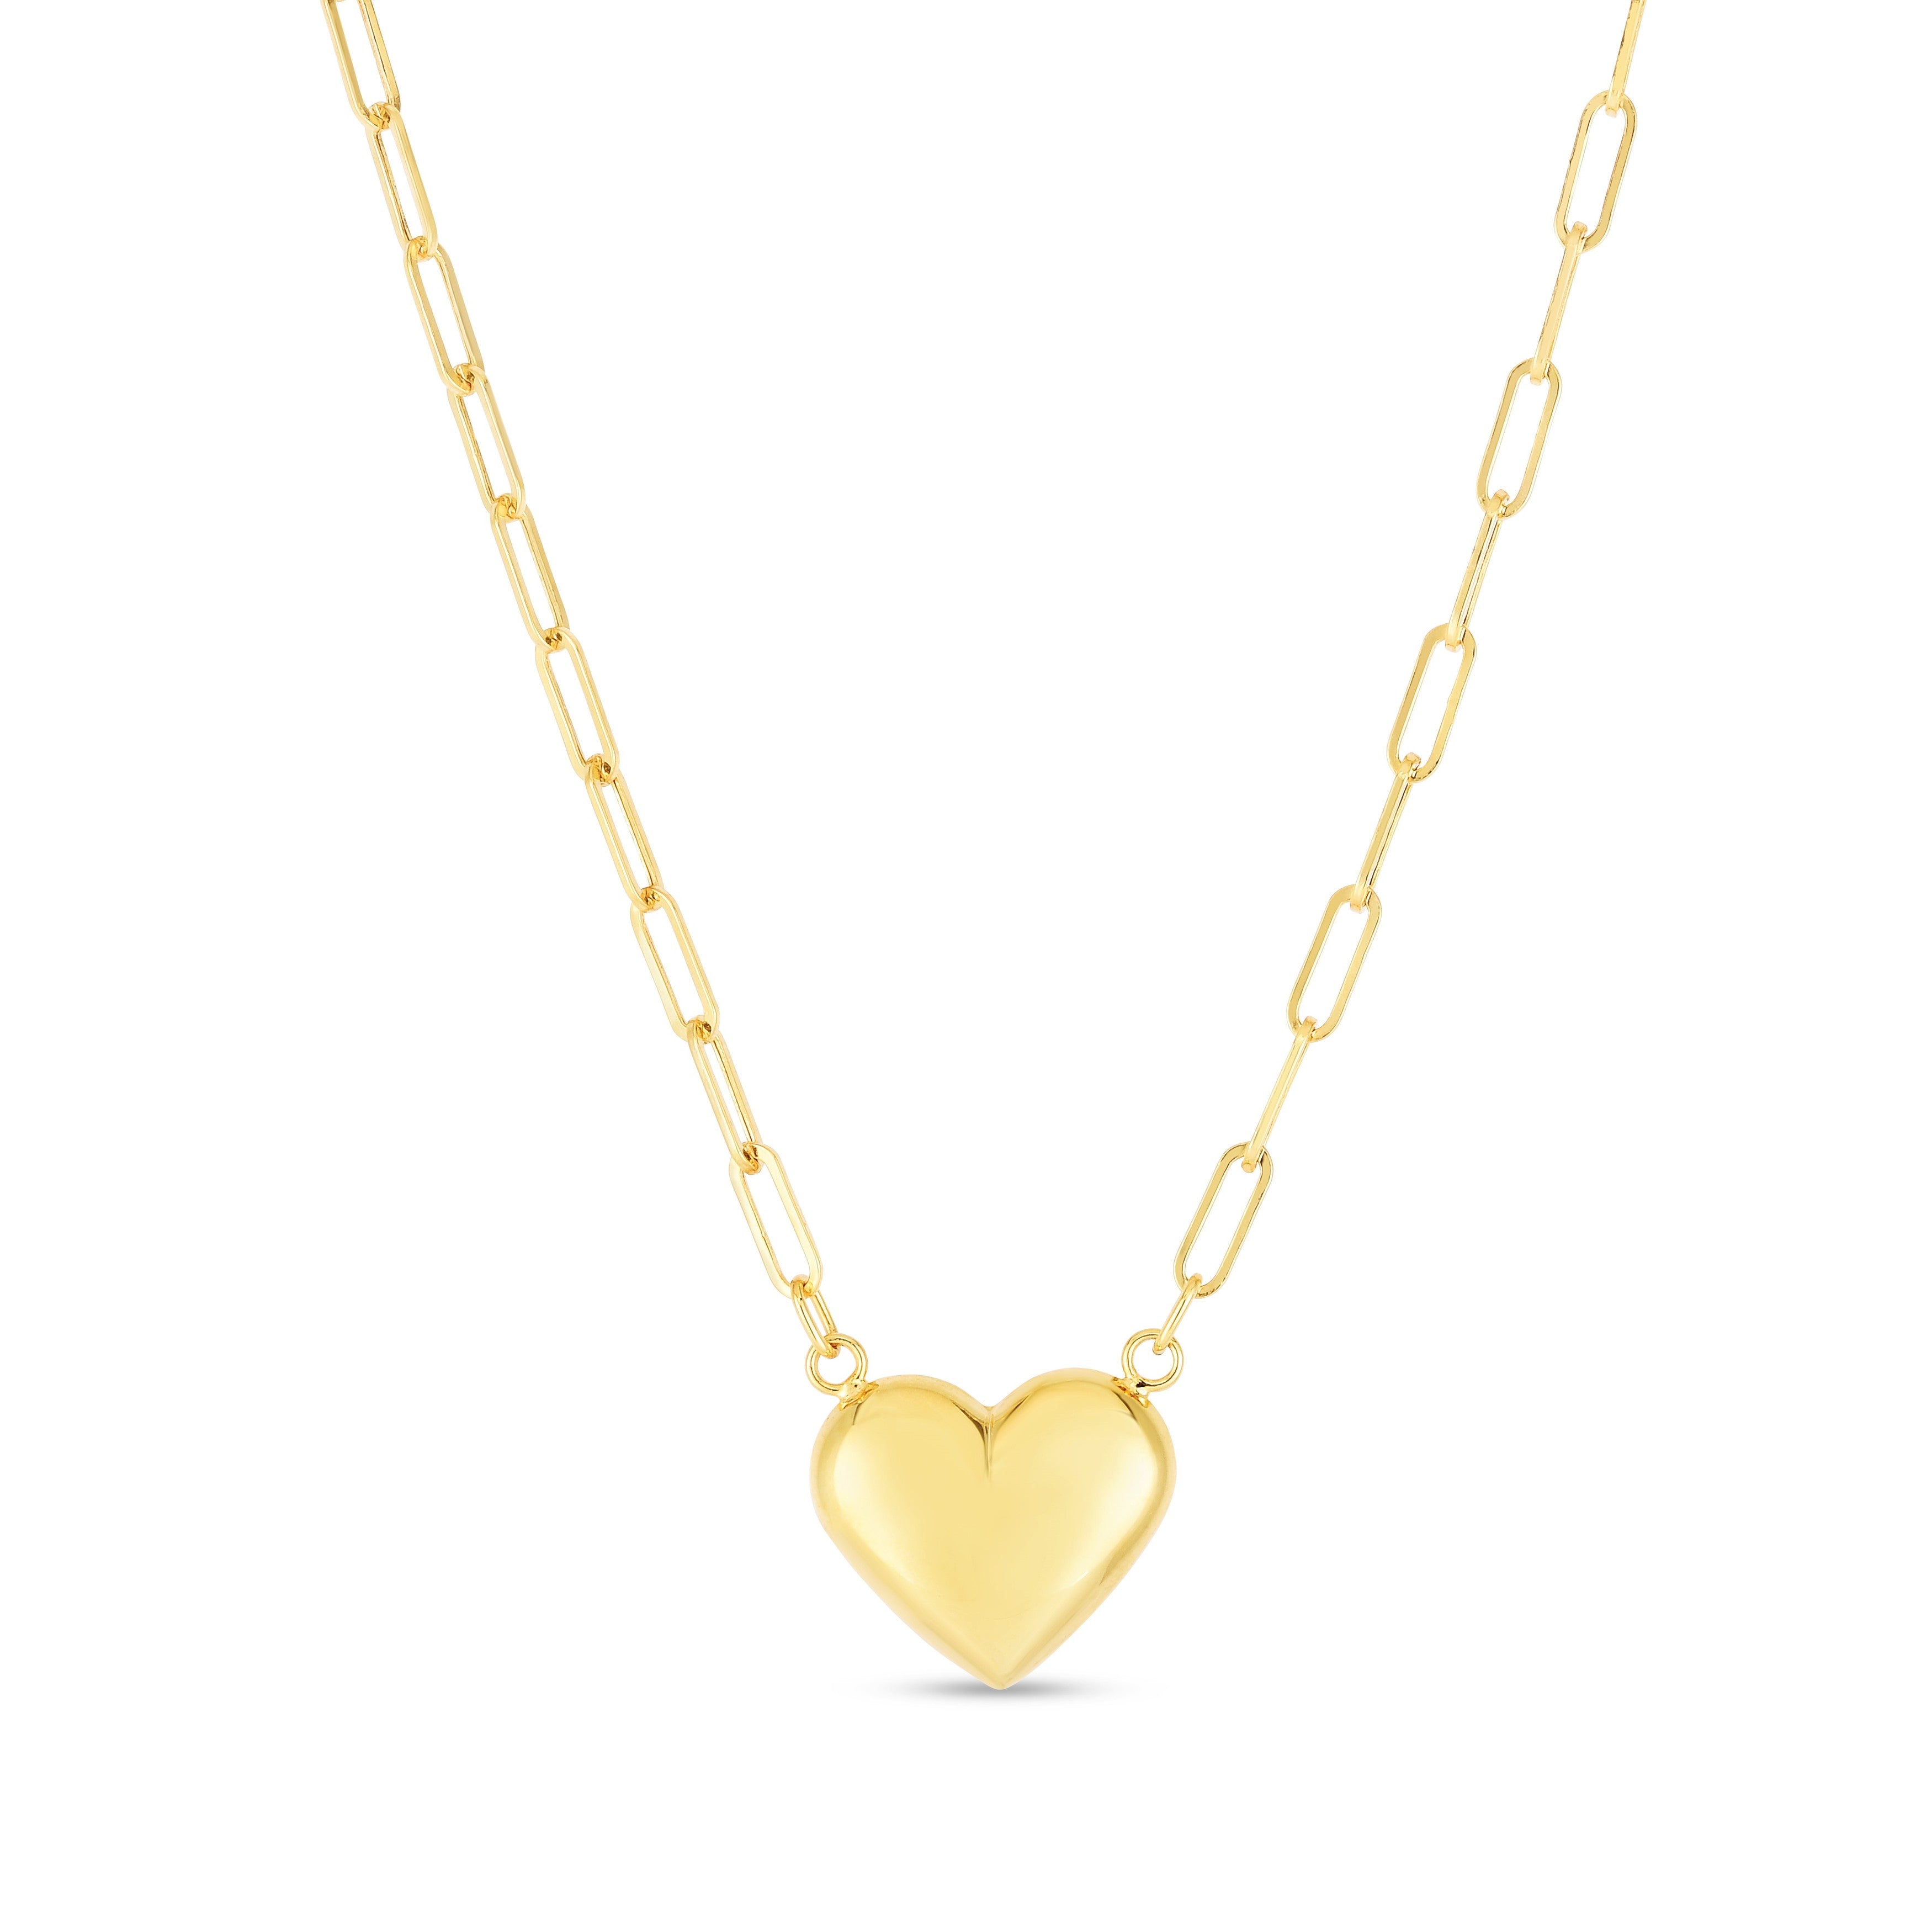 14K GOLD PAPRCLIP HEART NECKLACE